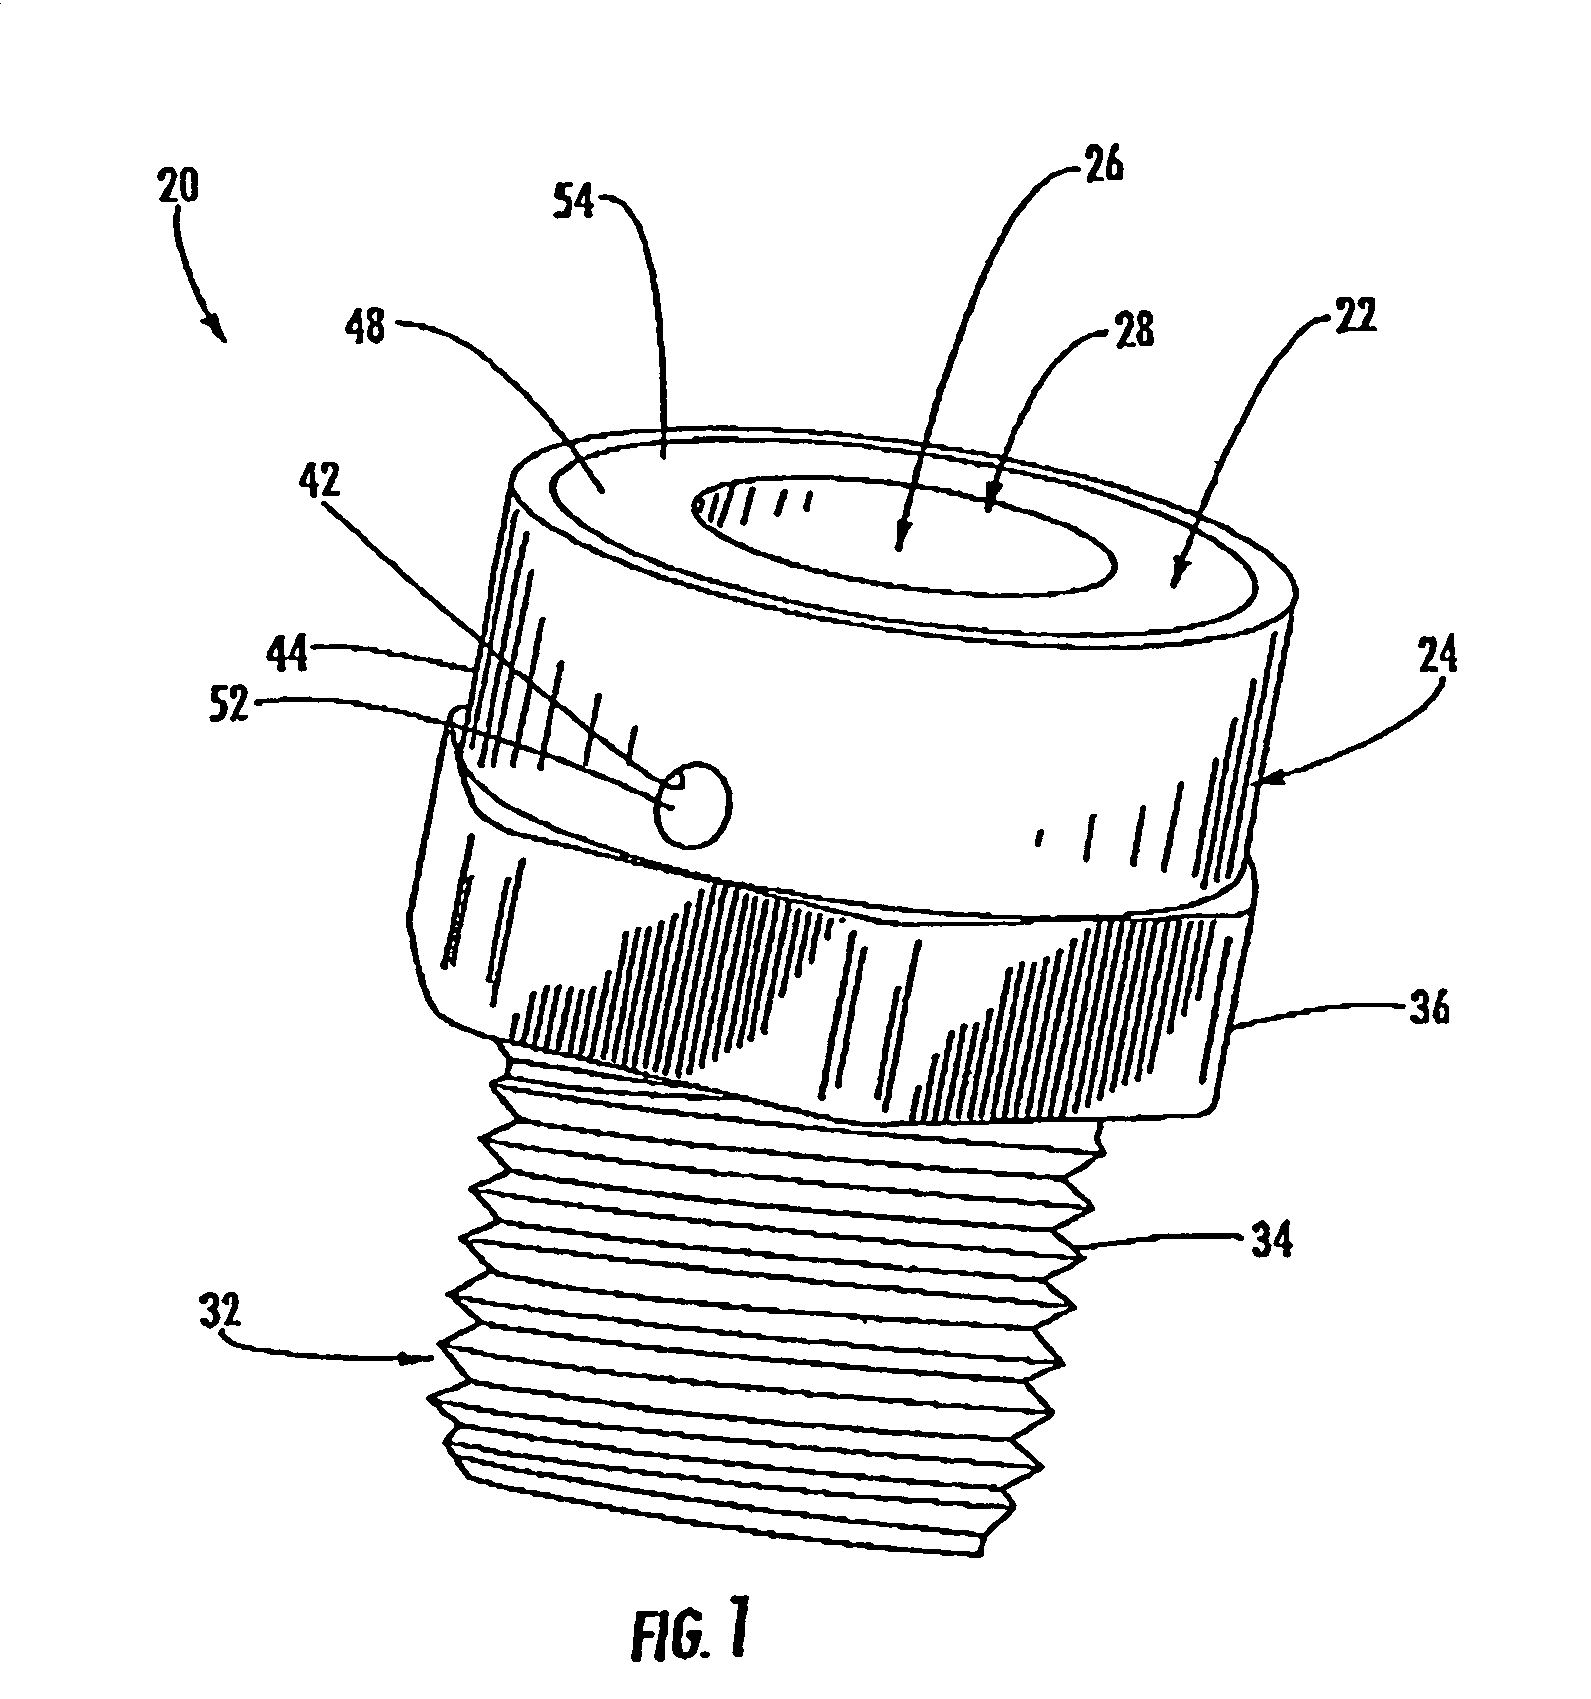 Composite polymeric transition pipe fitting for joining polymeric and metallic pipes